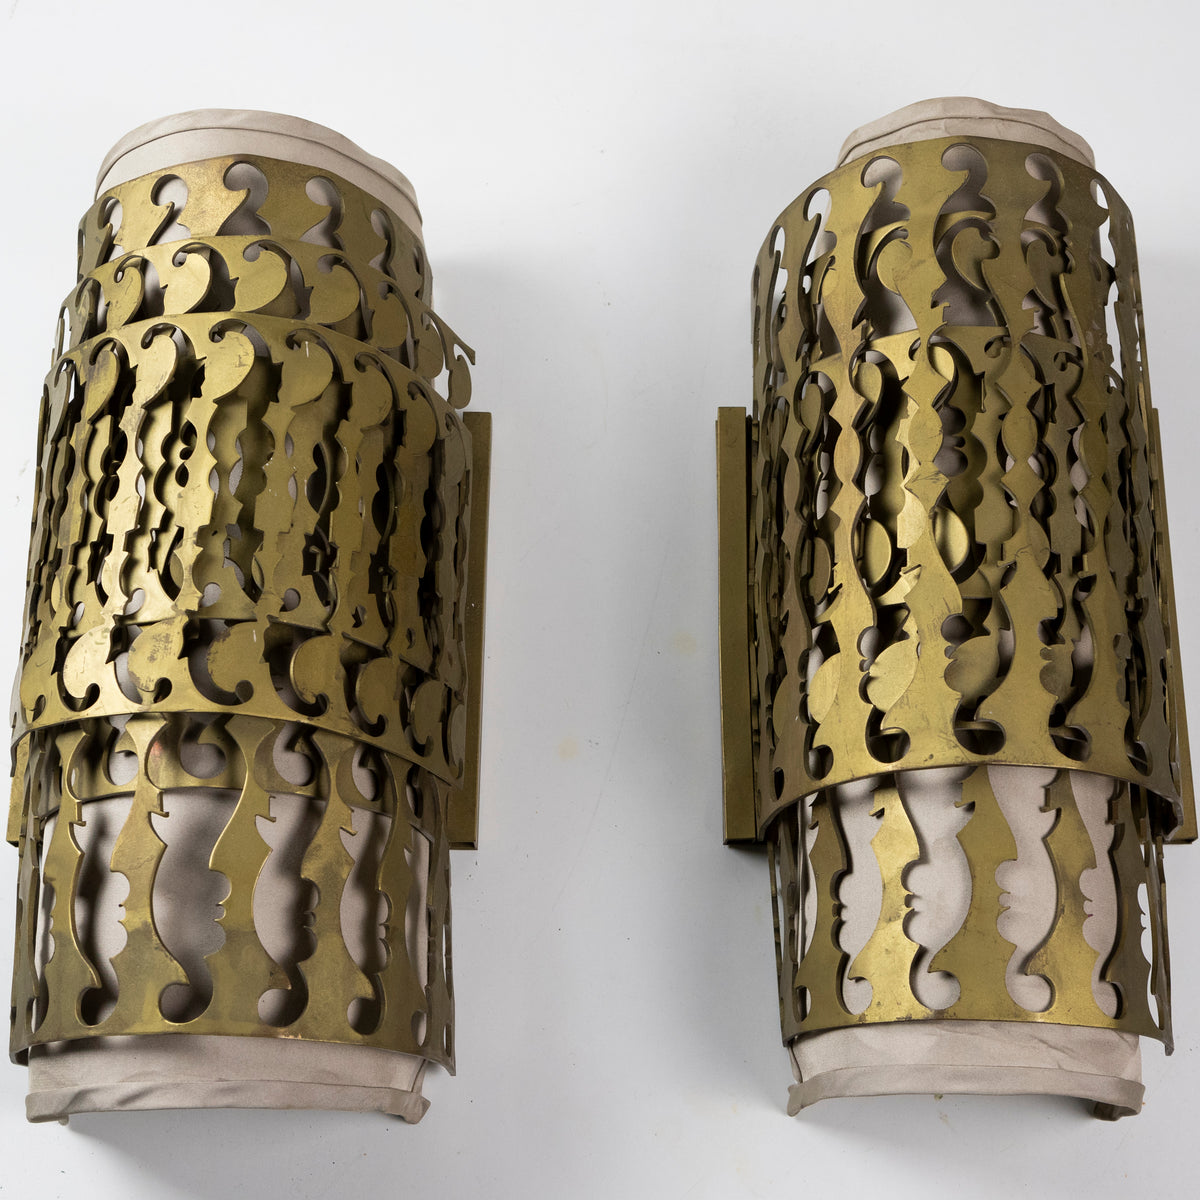 Pair of Reclaimed Wall Lights with Ornate Brass Fretwork | The Architectural Forum